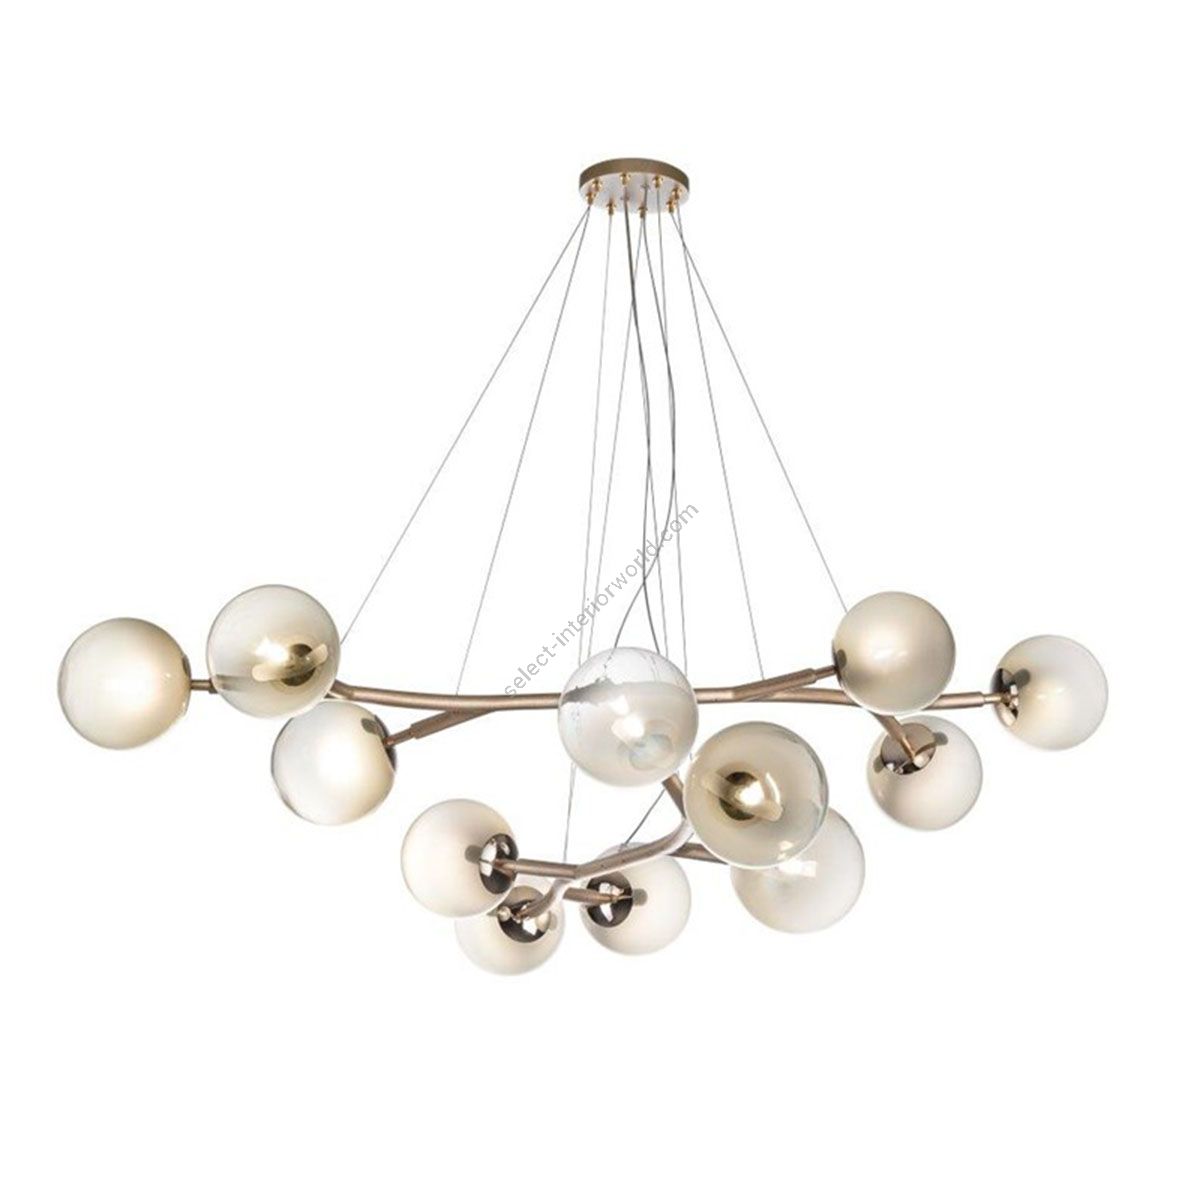 Il Paralume Marina / Chandelier 12-Lights, Modern style / Buds 2248/CH12